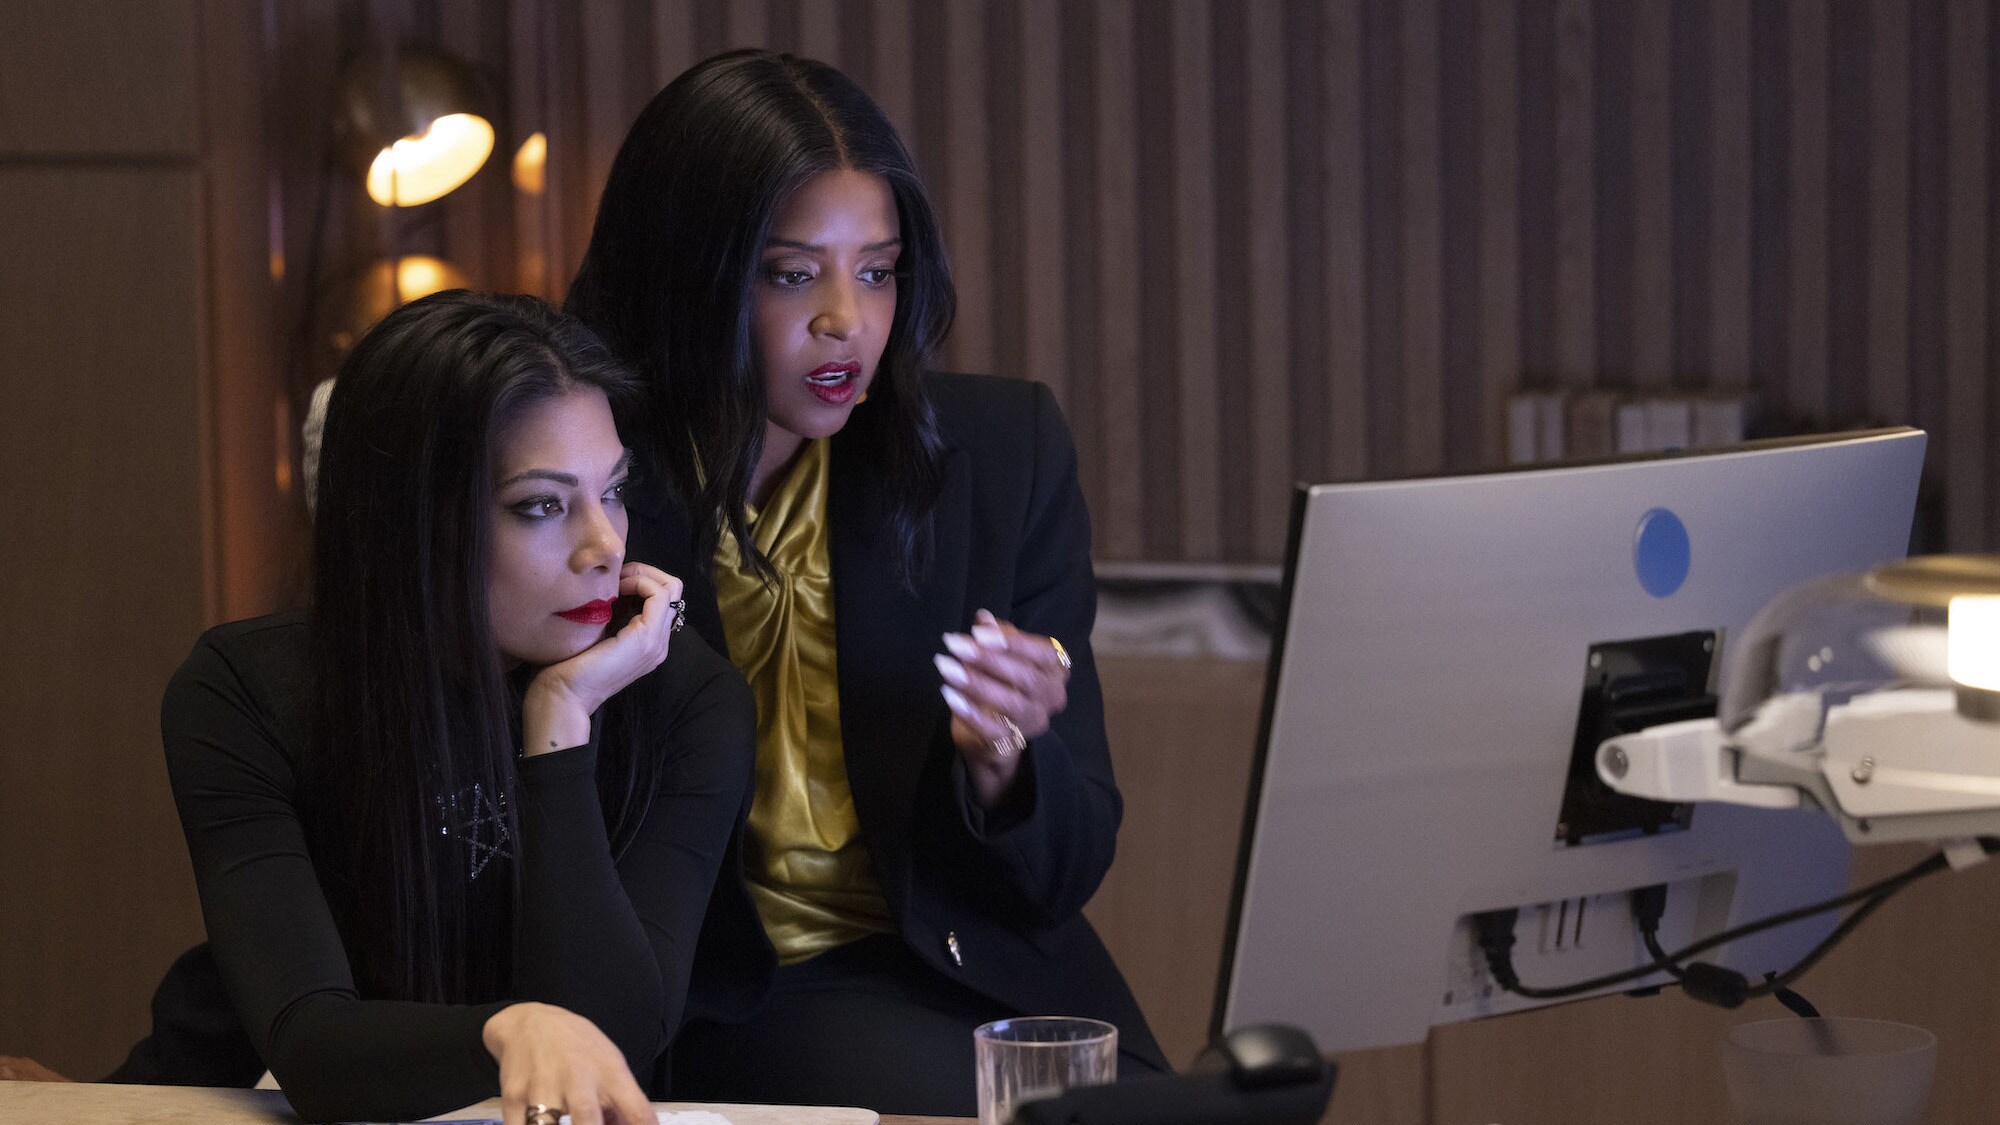 (L-R): Ginger Gonzaga as Nikki Ramos and Renée Elise Goldsberry as Mallory Book in Marvel Studios' She-Hulk: Attorney At Law, exclusively on Disney+. Photo by Chuck Zlotnick. © 2022 MARVEL.